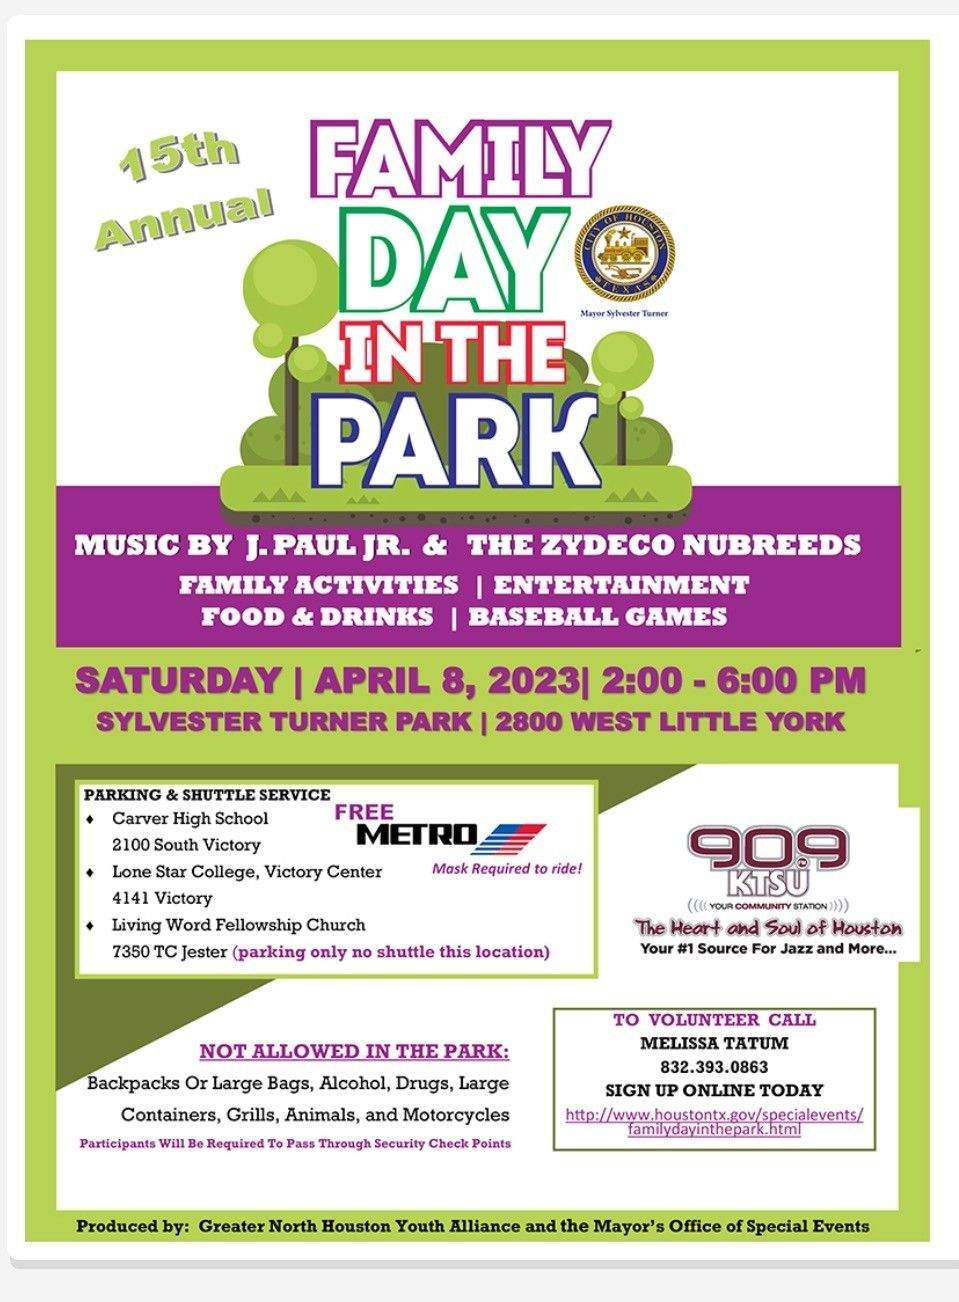 Family Day In the Park - African American News and Issues